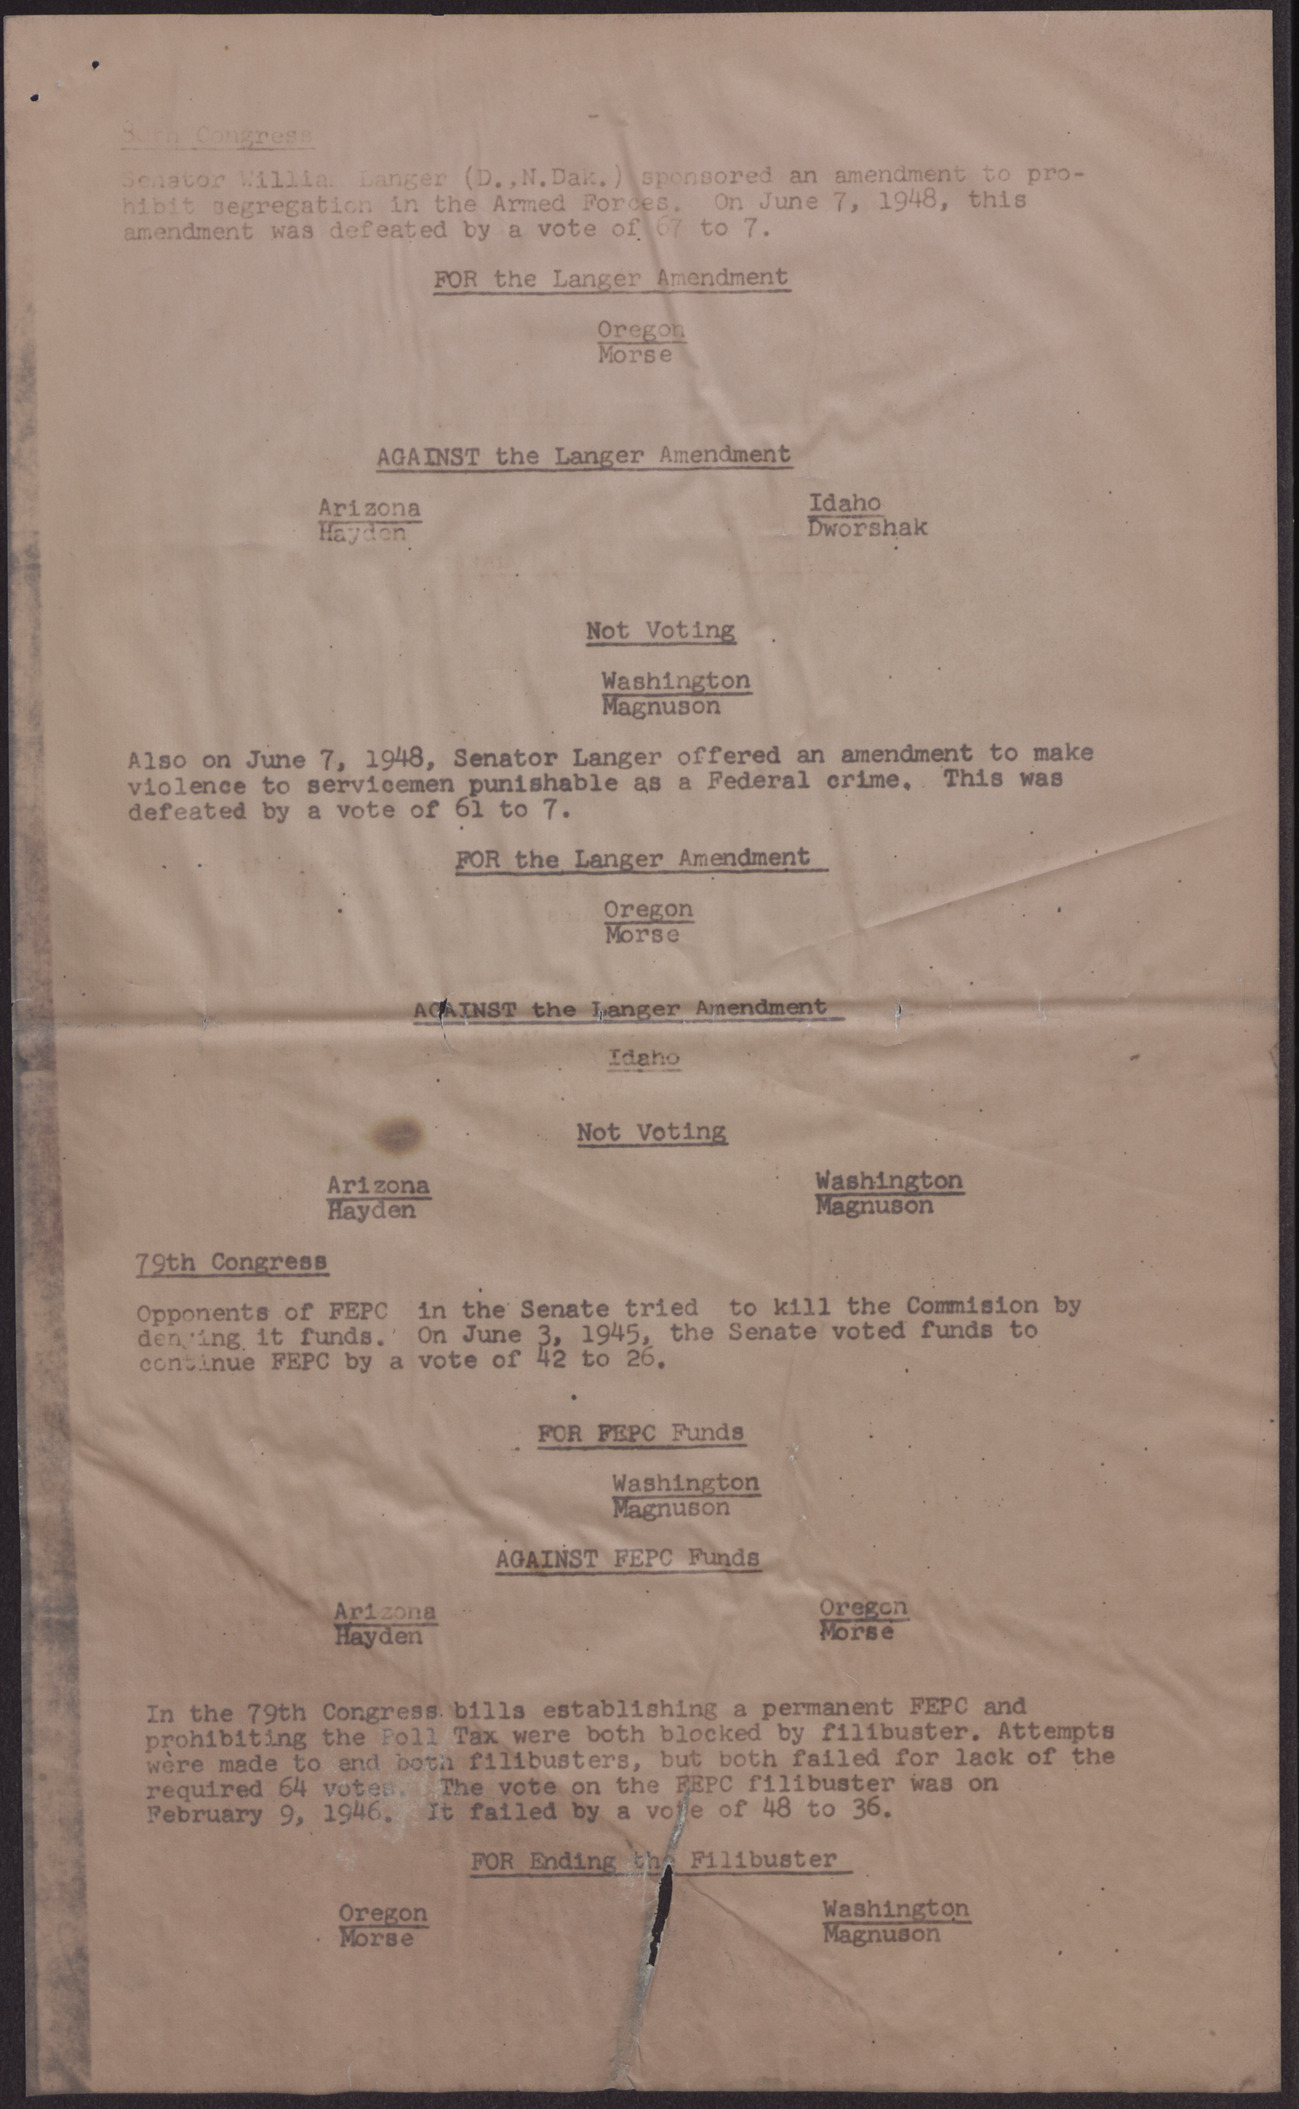 Summary of Voting Records of Senators from States in NAACP Region I (10 pages), August 1960, page 9